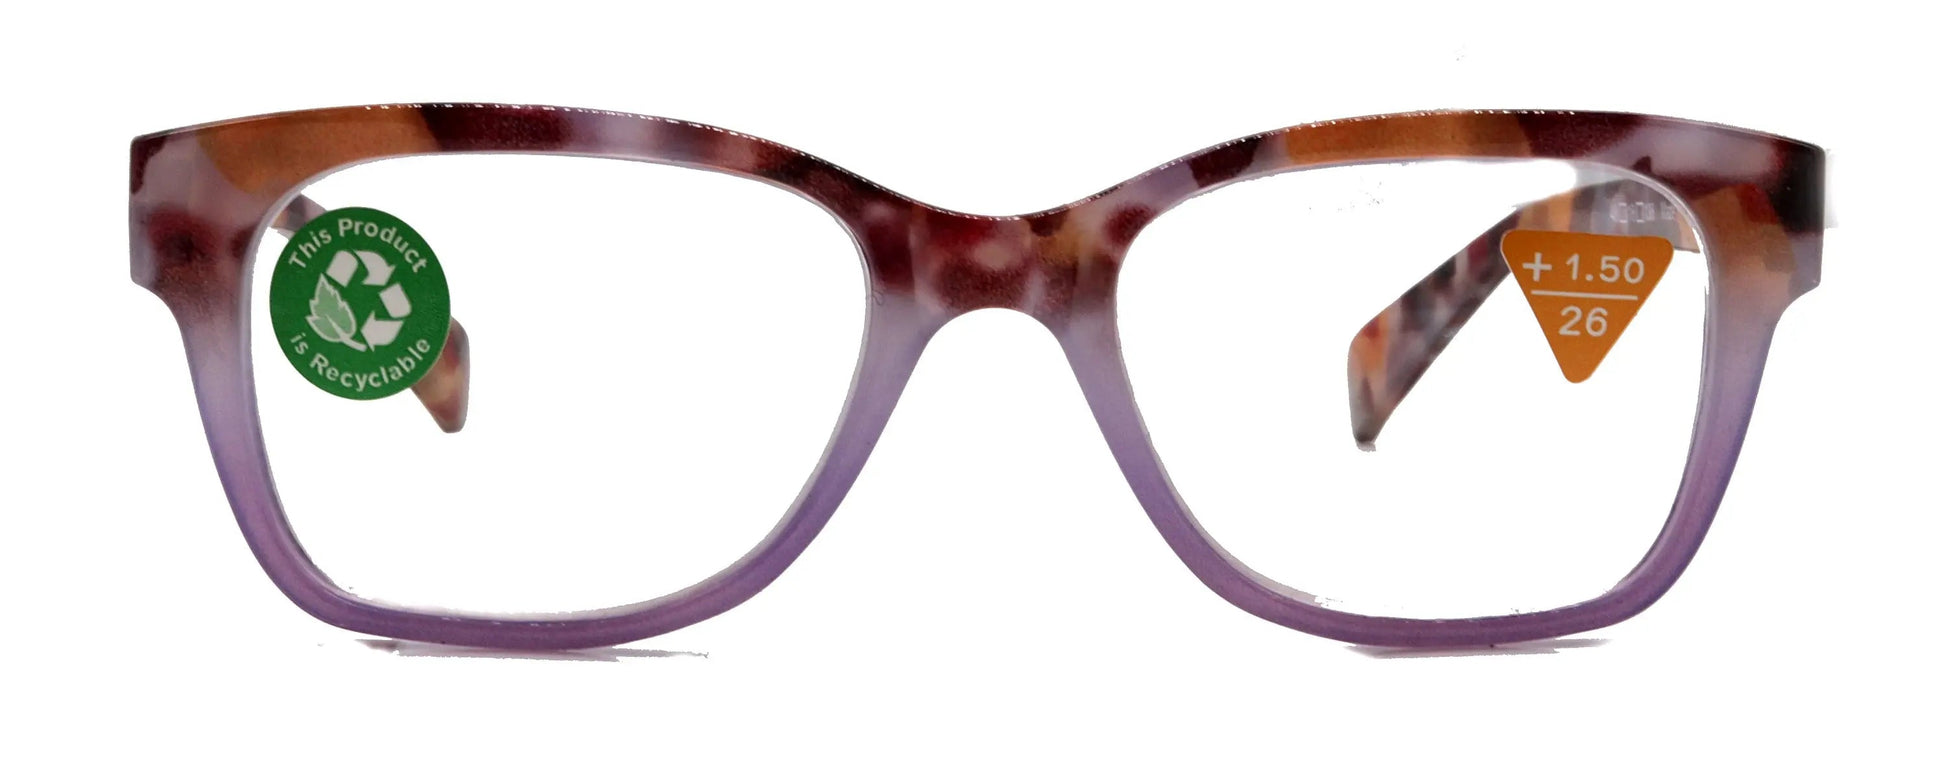 Aya, (Premium) Reading Glasses, High End Fashion Reader,+1.25 to +4 Magnifiers, (Purple n Brown Tortoise) Square Frame. NY Fifth Avenue.